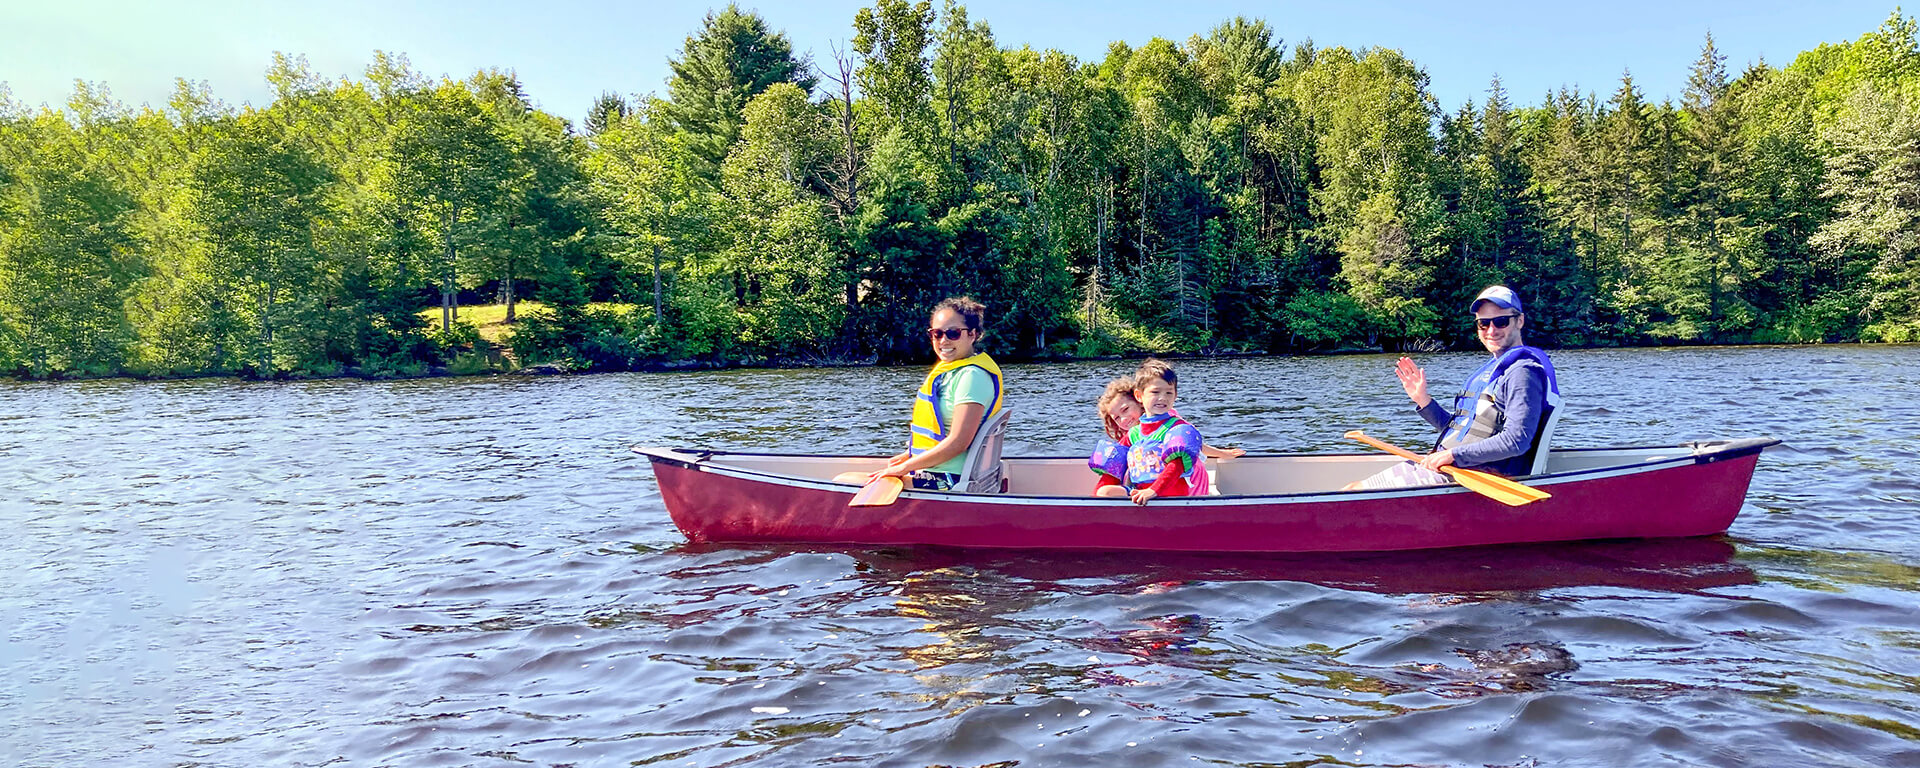 Patrick Ens, Capital One Canada President, canoes with his family 